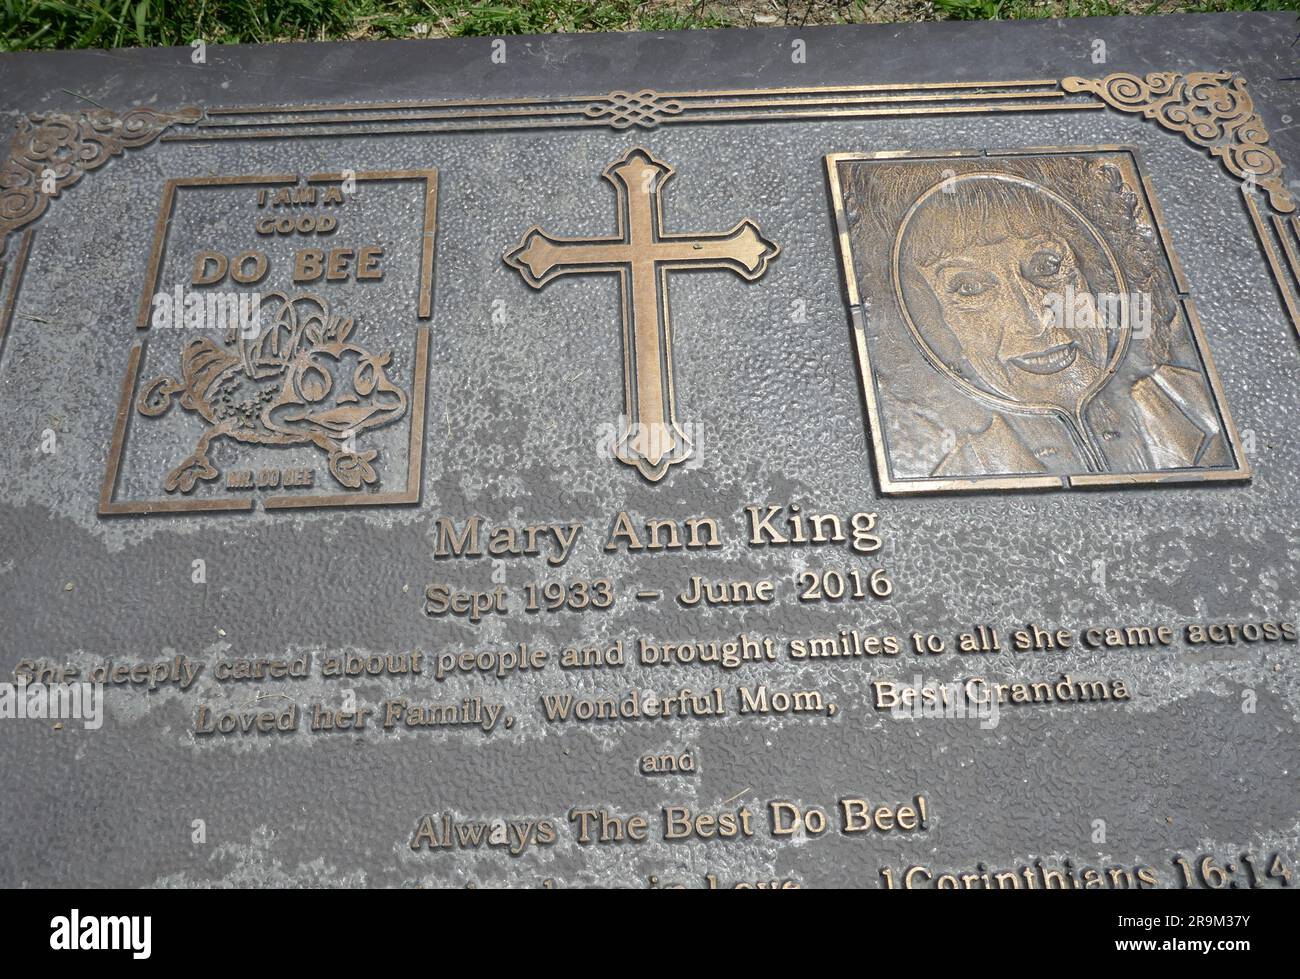 Covina Hills, California, USA 26th June 2023 Television Personality Mary Ann King Grave in Golden Dawn Section at Forest Lawn Memorial Park Covina Hills on June 26, 2023 in Covina Hills, California, USA. Photo by Barry King/Alamy Stock Photo Stock Photo